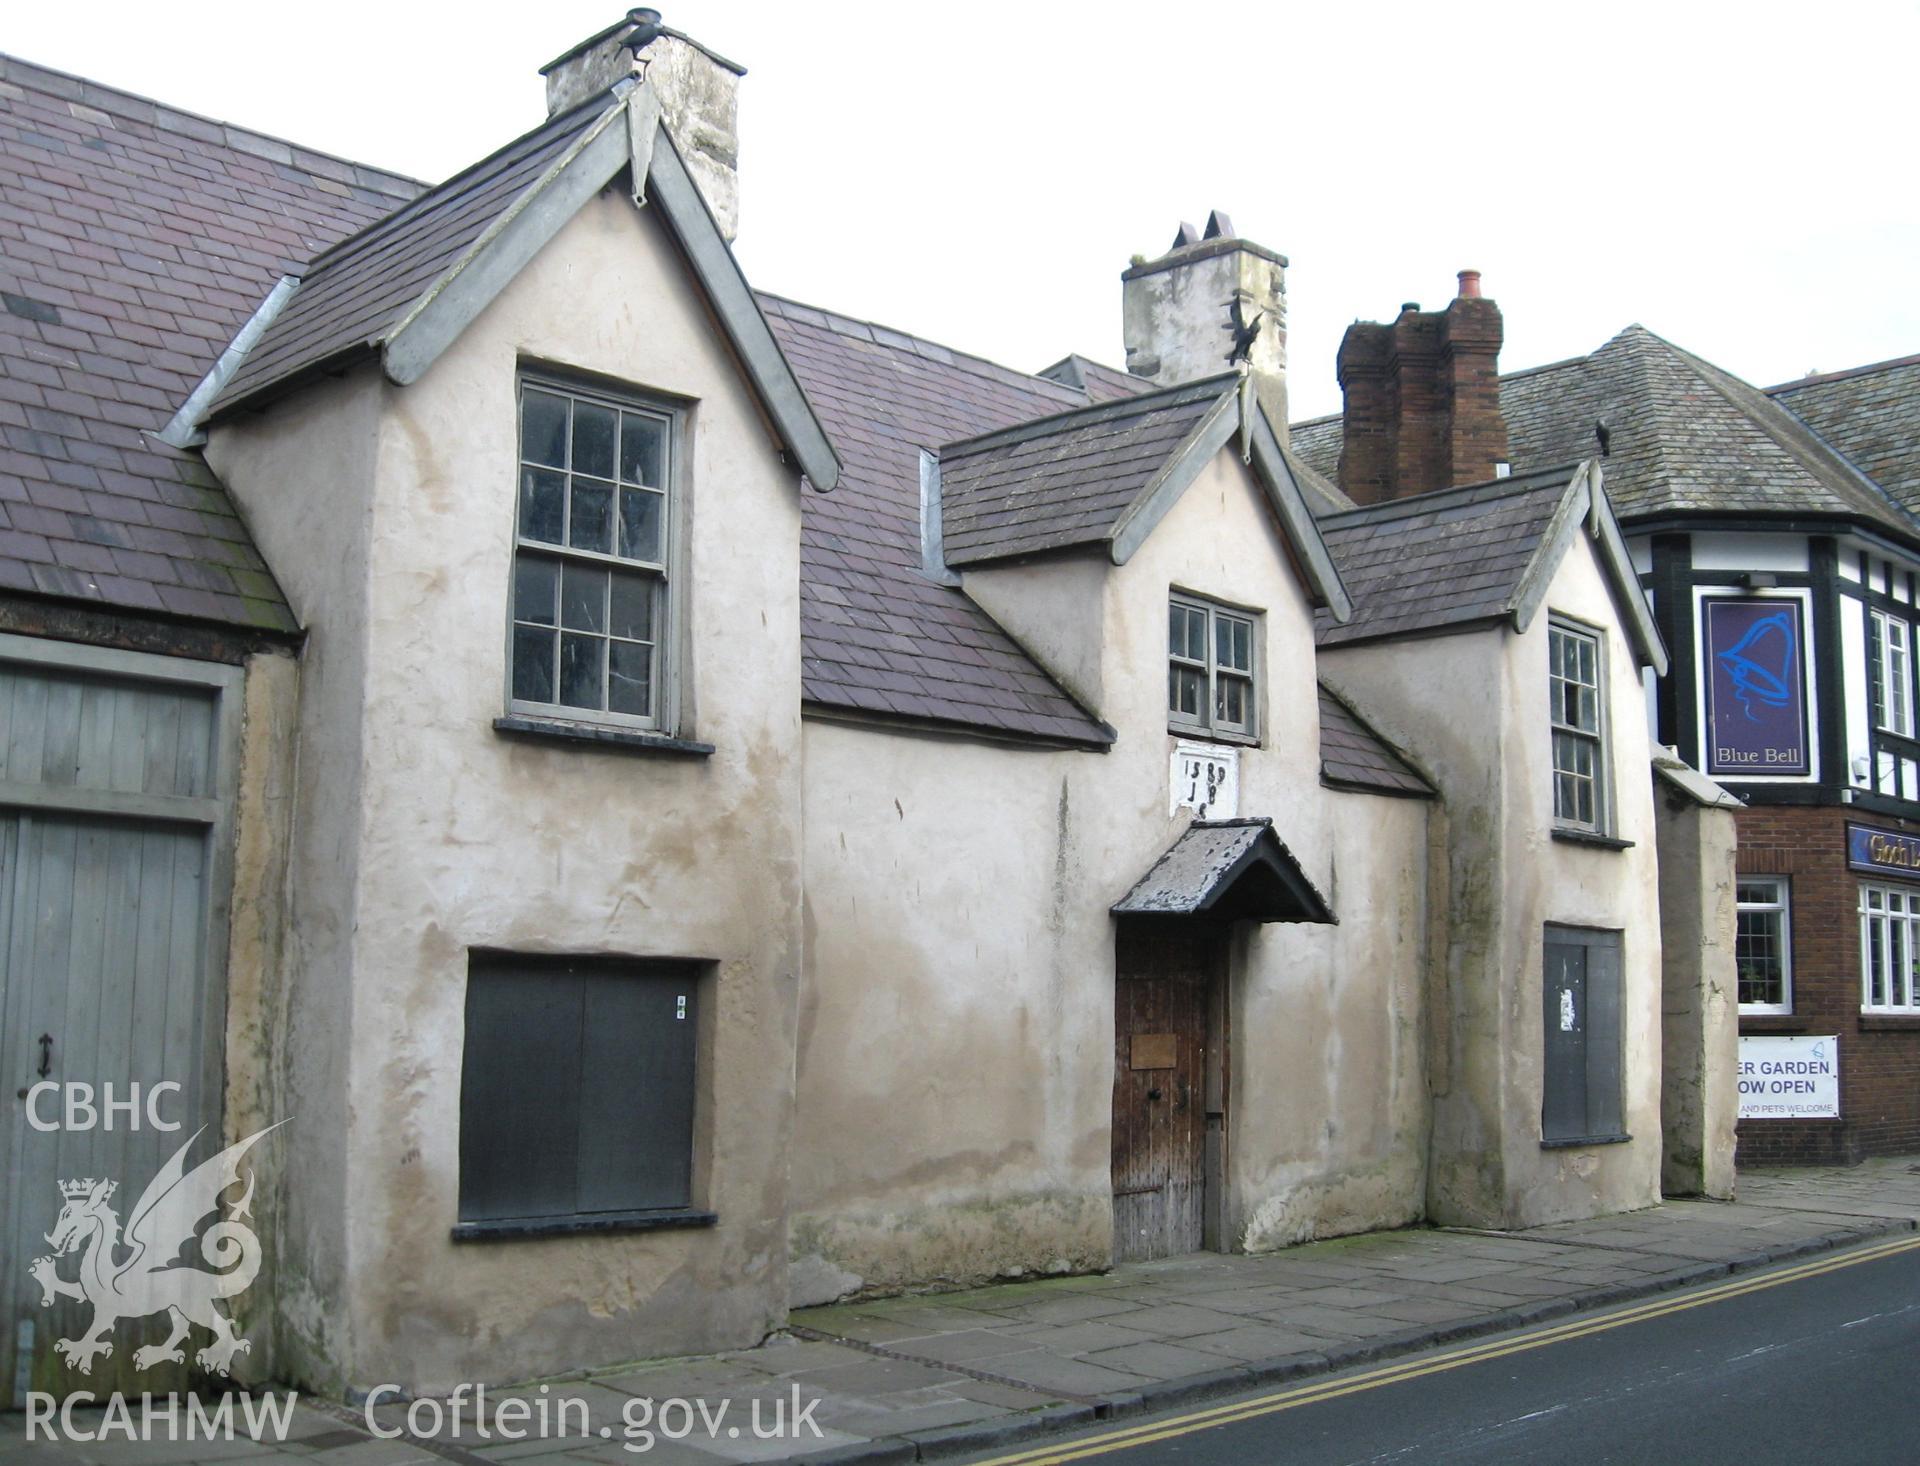 Colour photo of 11 Castle Street, Conwy, taken by Paul R. Davis and dated 3rd August 2010.